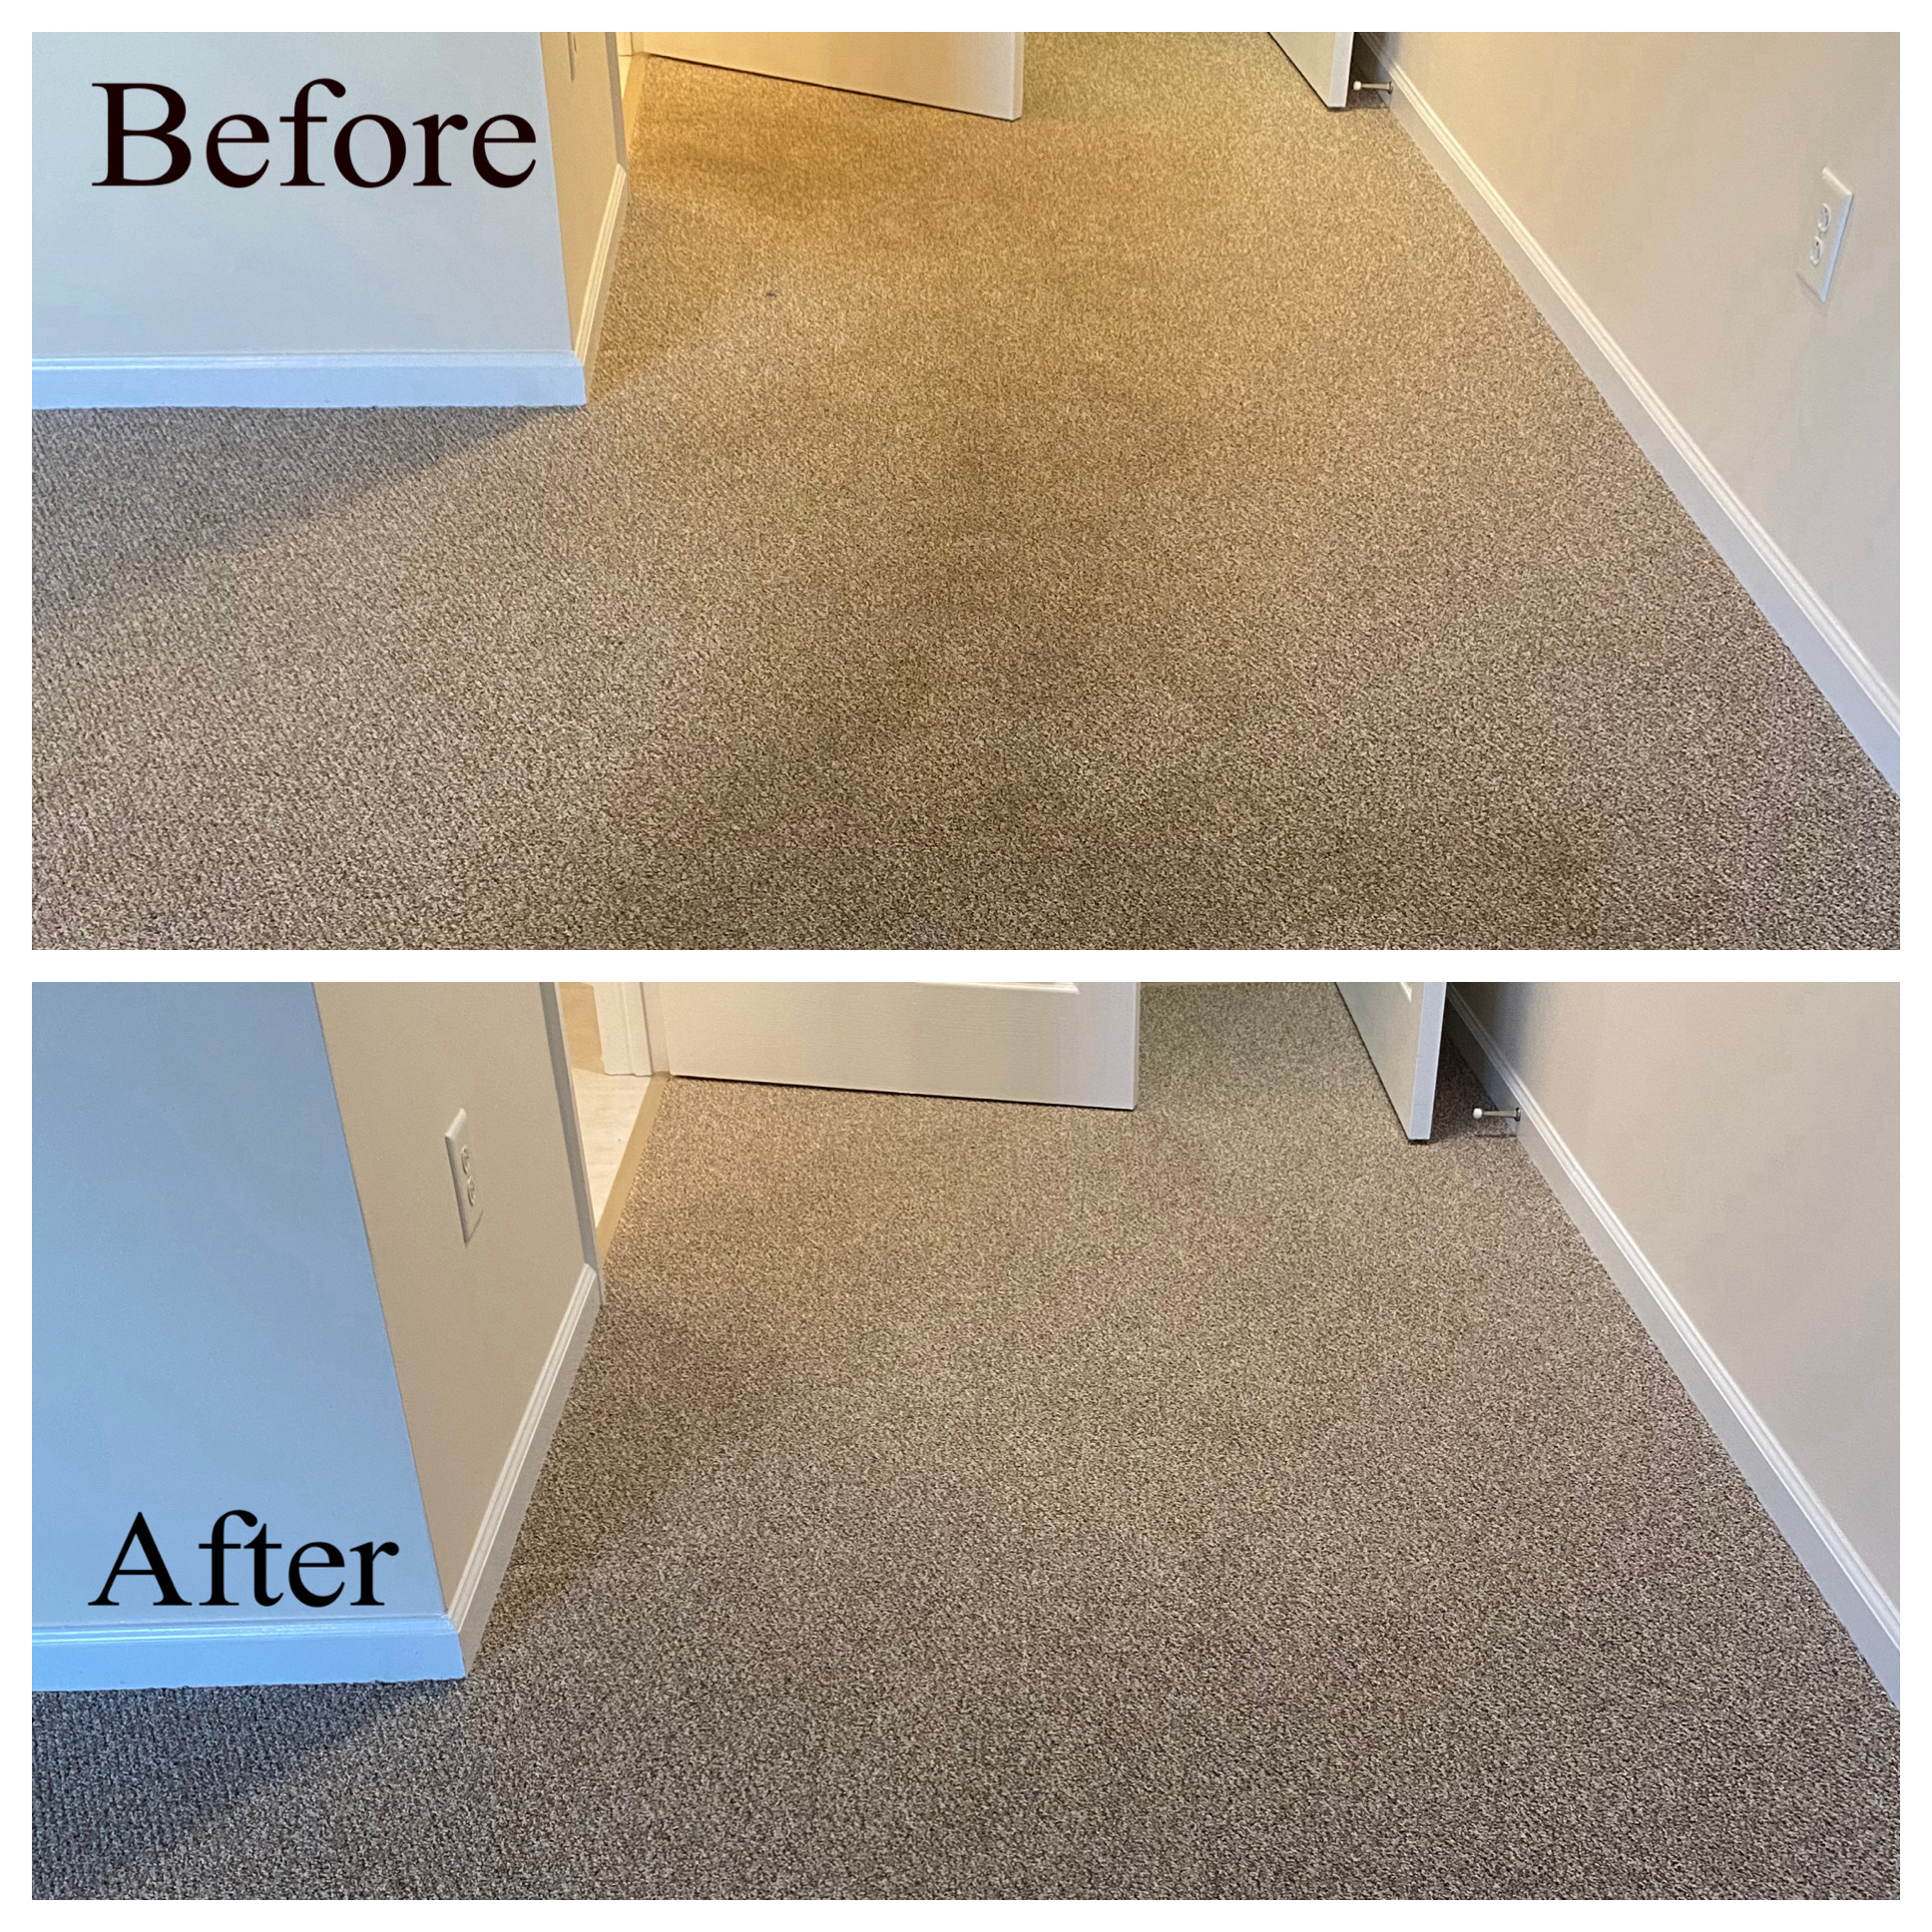 Carpet DryClean Before After 2